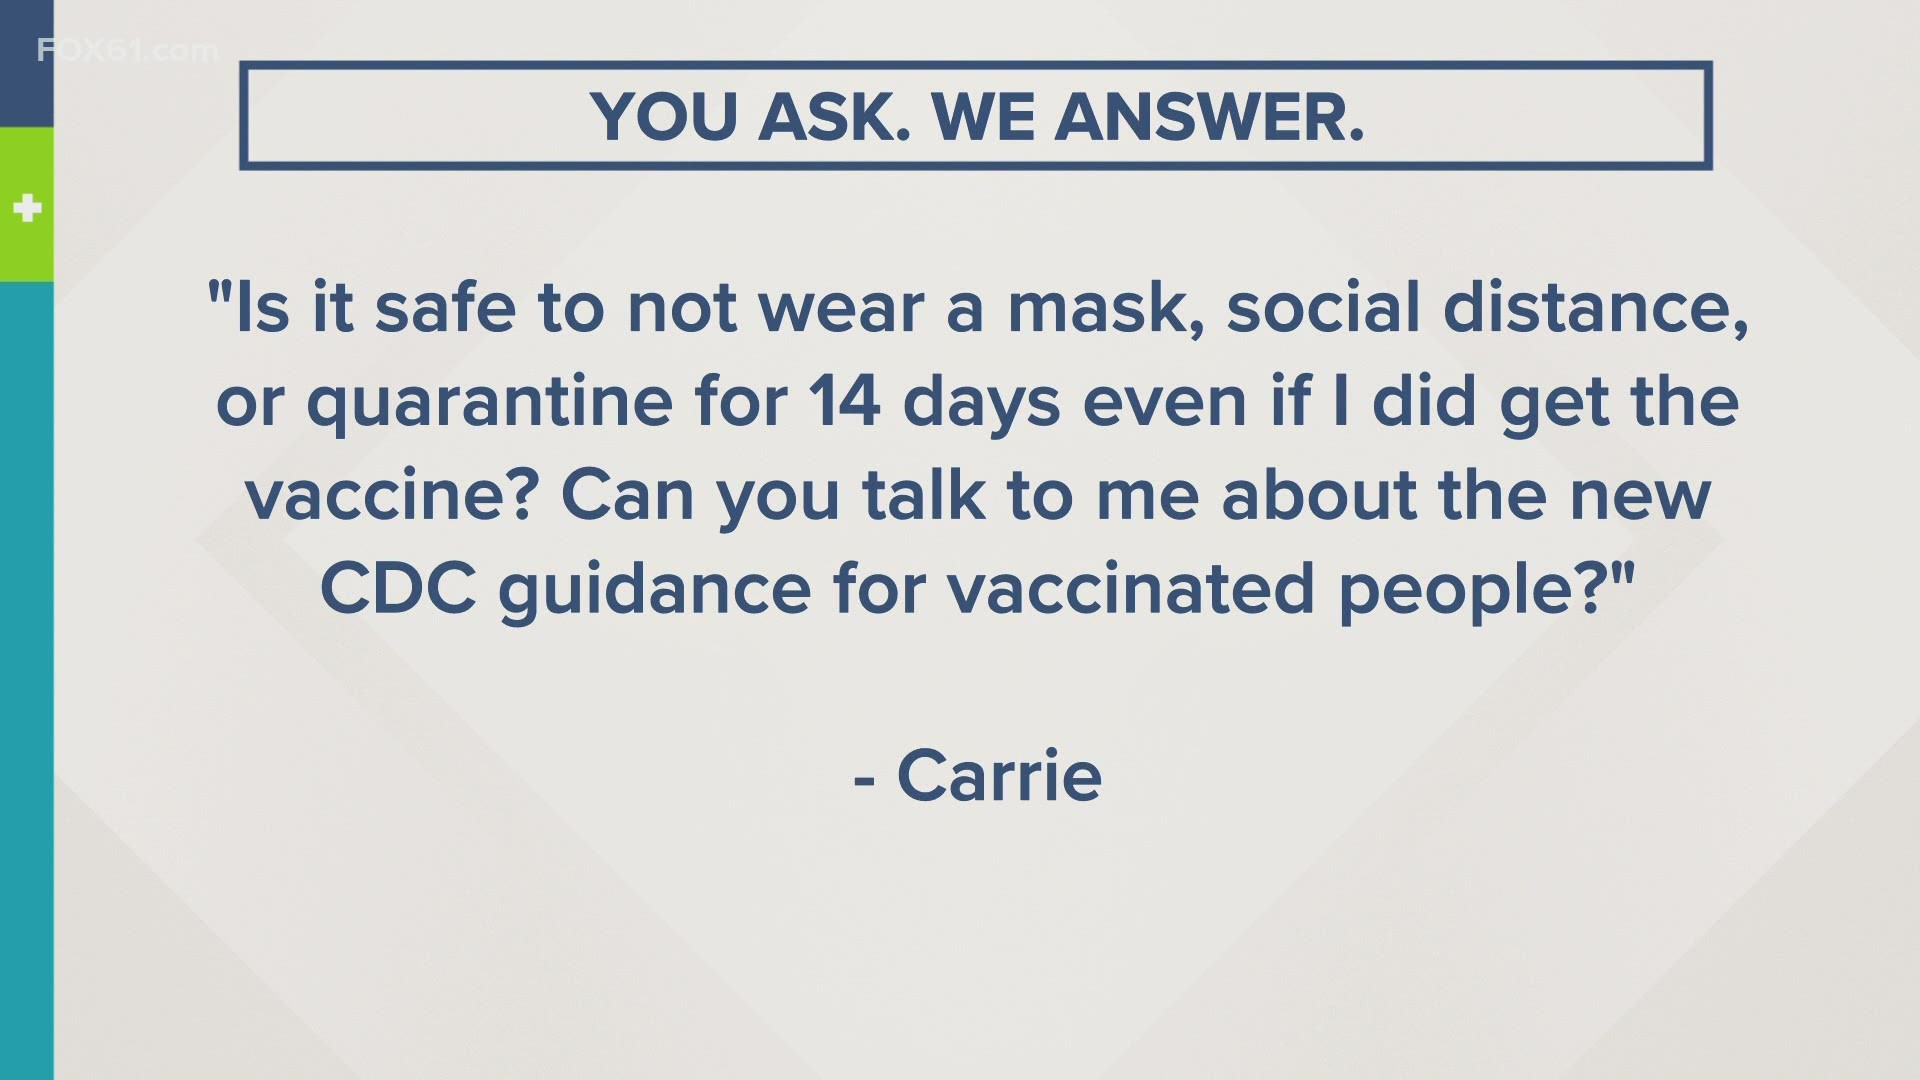 Can you talk to me about the new CDC guidance for vaccinated people?